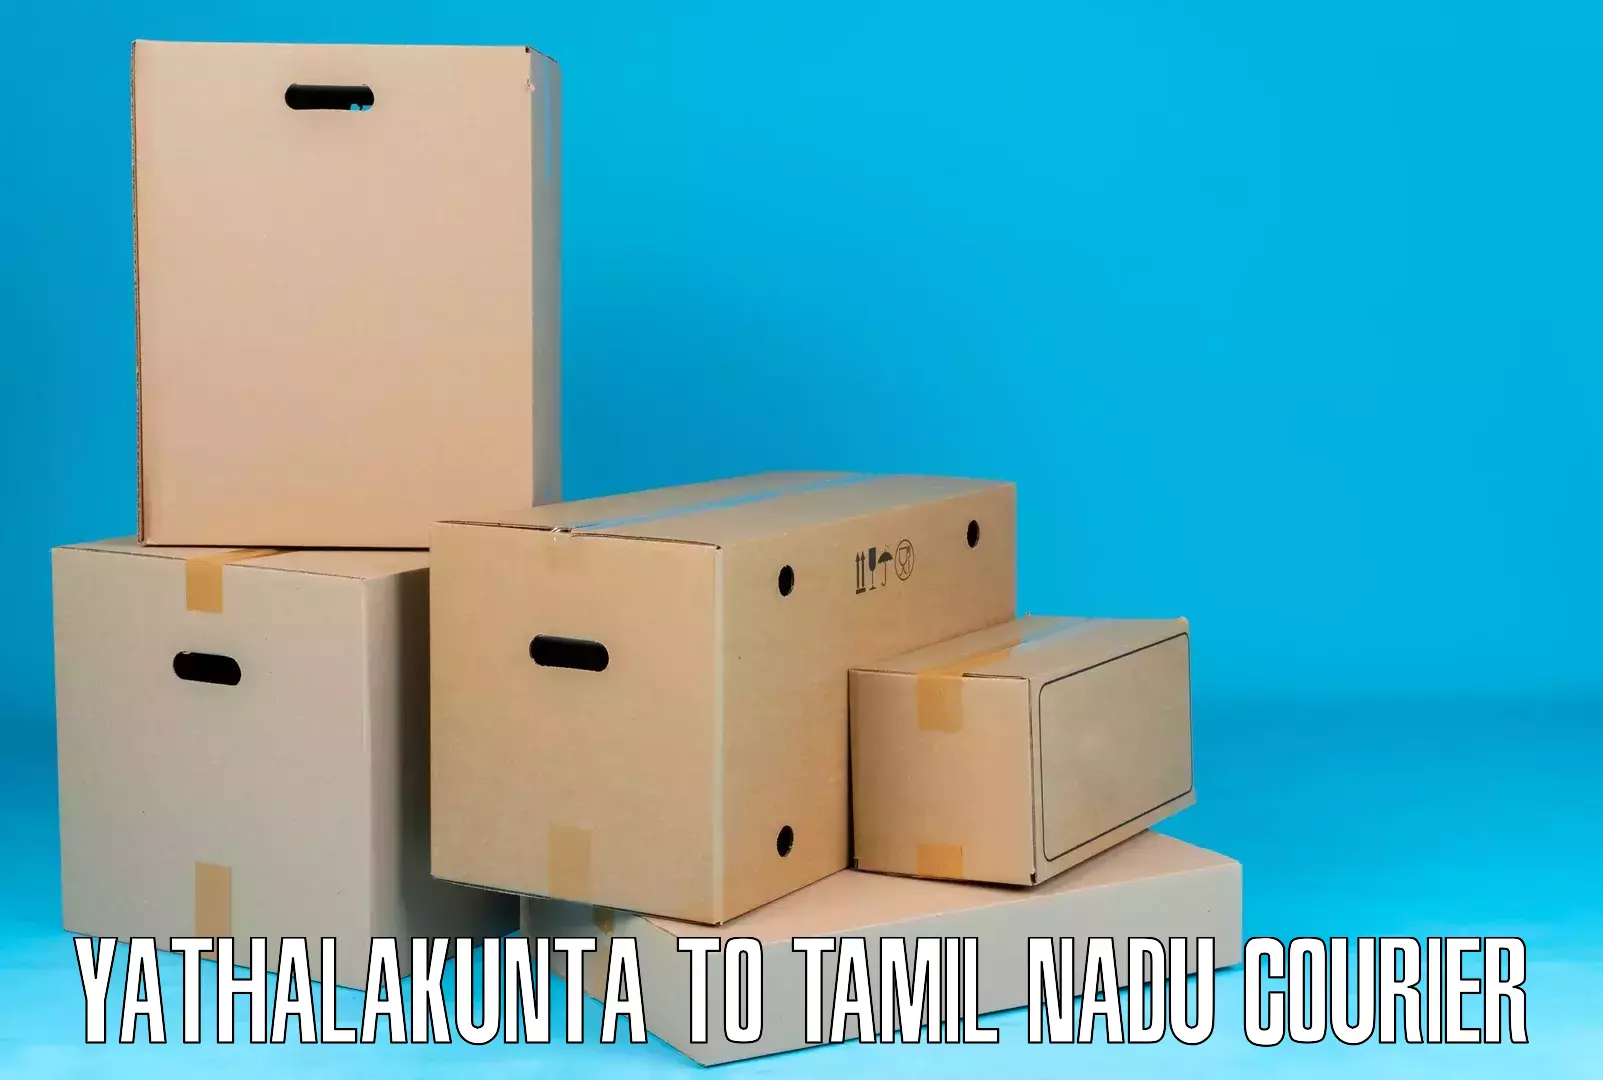 Courier service partnerships Yathalakunta to Tamil Nadu Agricultural University Coimbatore